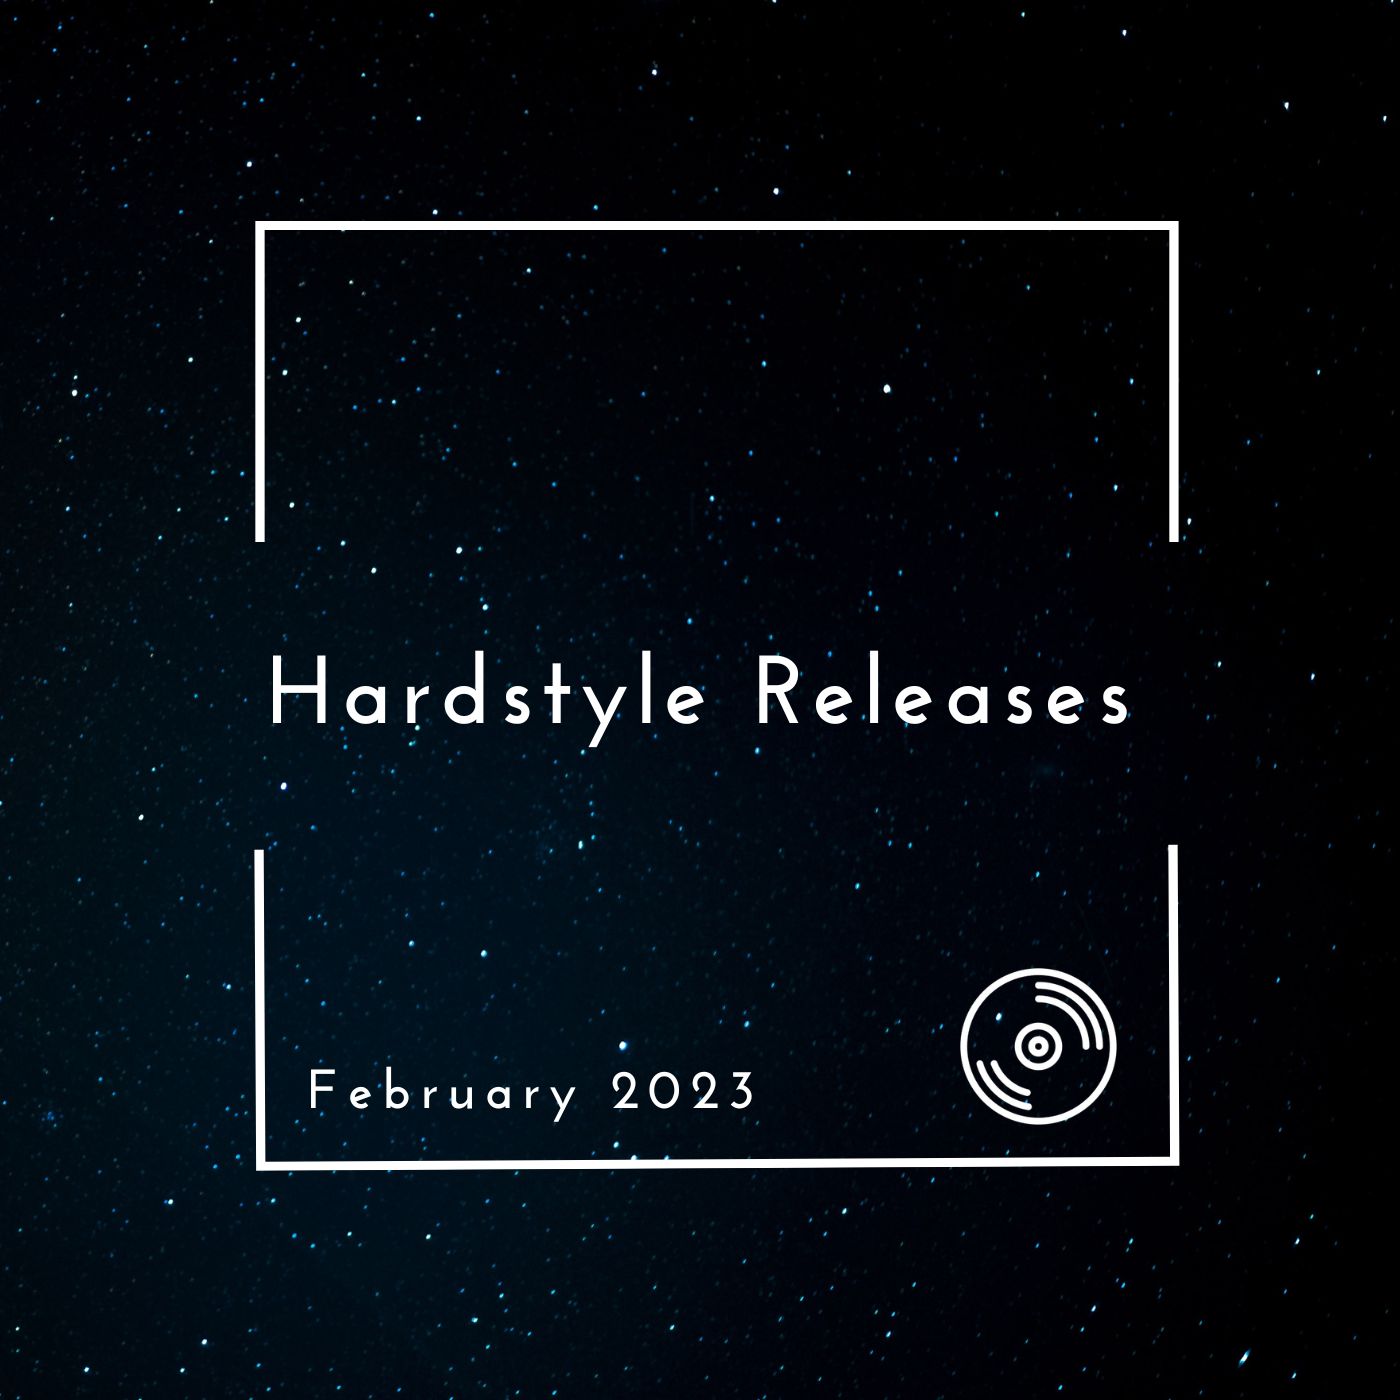 Hardstyle Releases February 2023